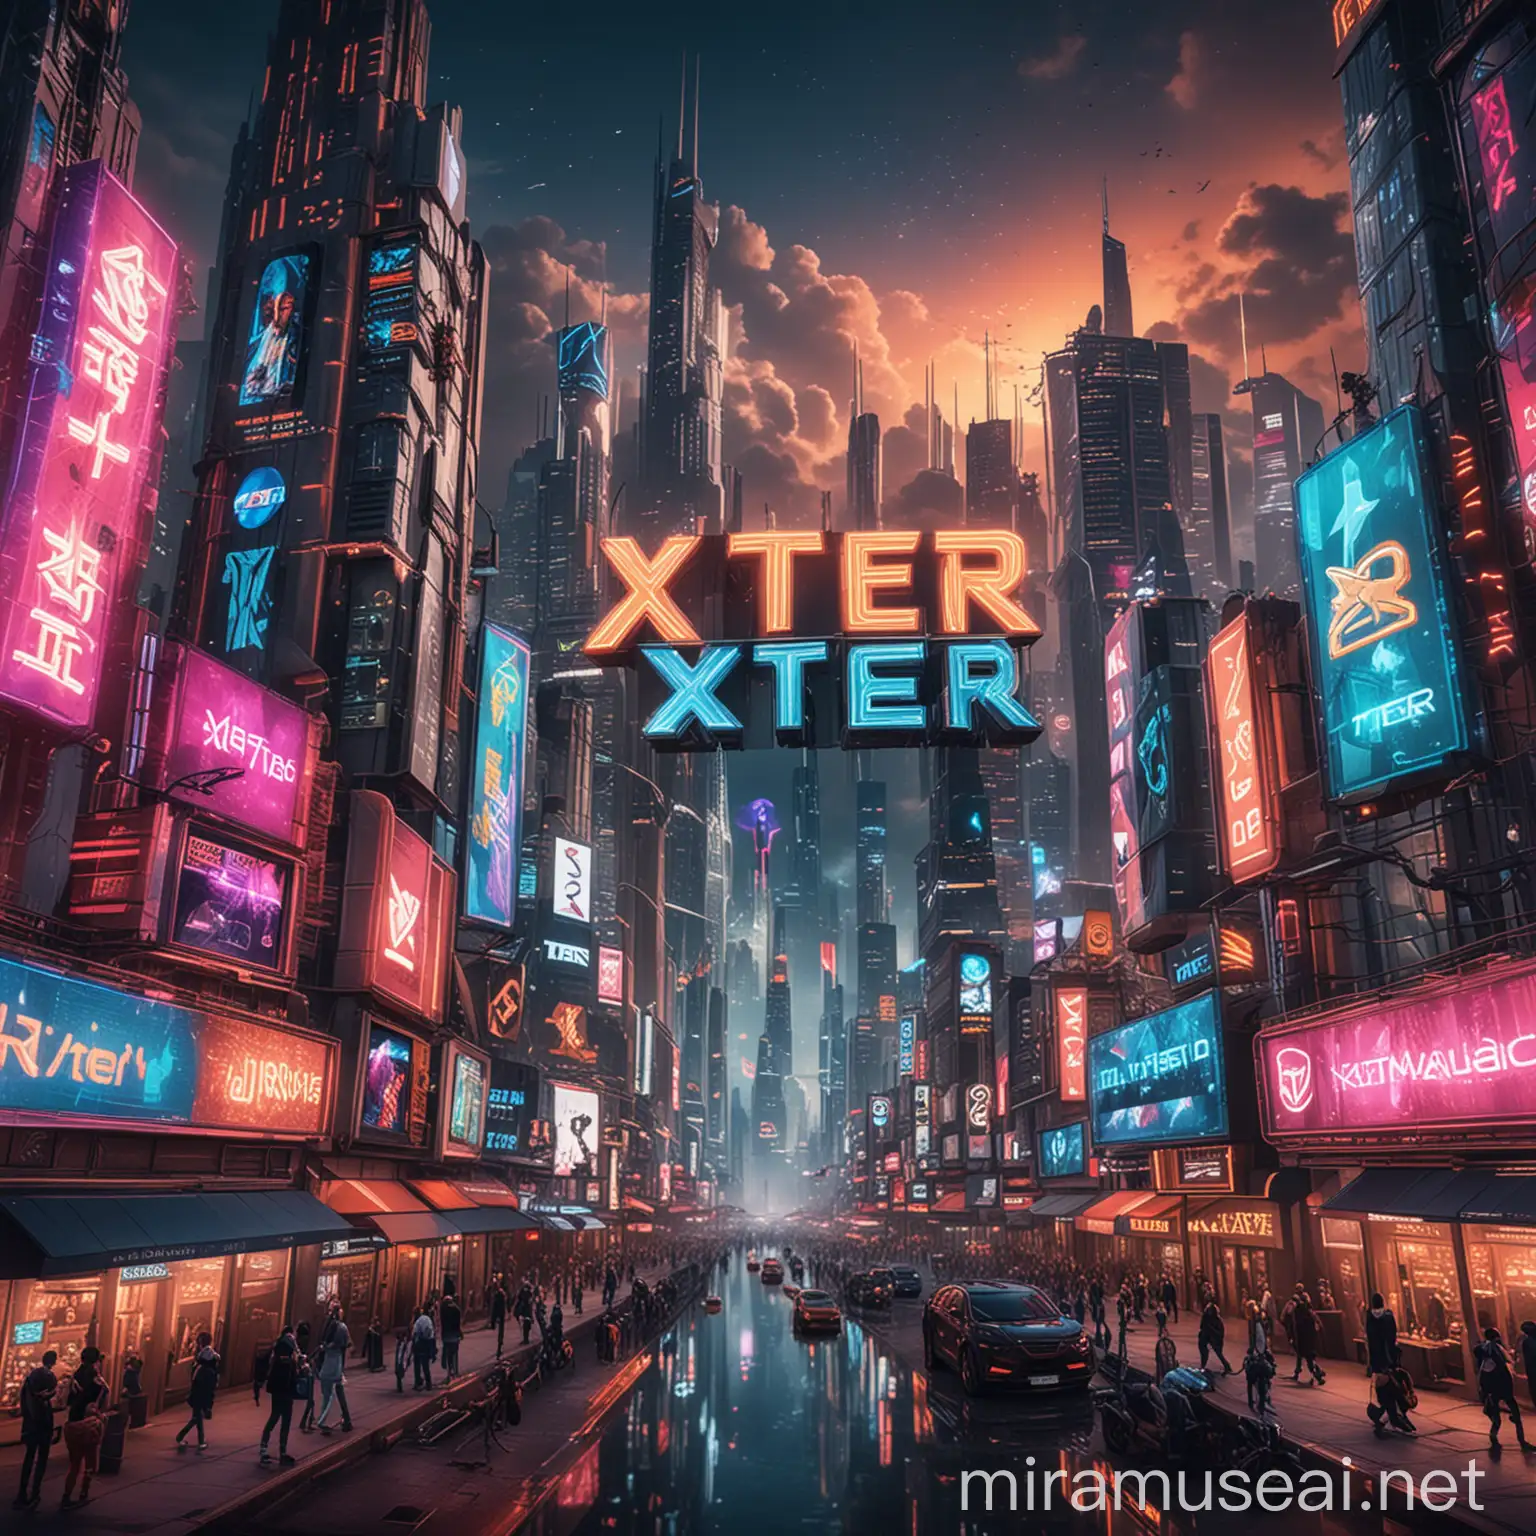 Picture a vibrant virtual cityscape with towering skyscrapers adorned with neon signs displaying the XTER logo. In the foreground, digital avatars engage in immersive gaming experiences, surrounded by cutting-edge technology and holographic displays. The artwork could evoke a sense of excitement and possibility, highlighting the transformative potential of decentralized gaming with $XTER.





